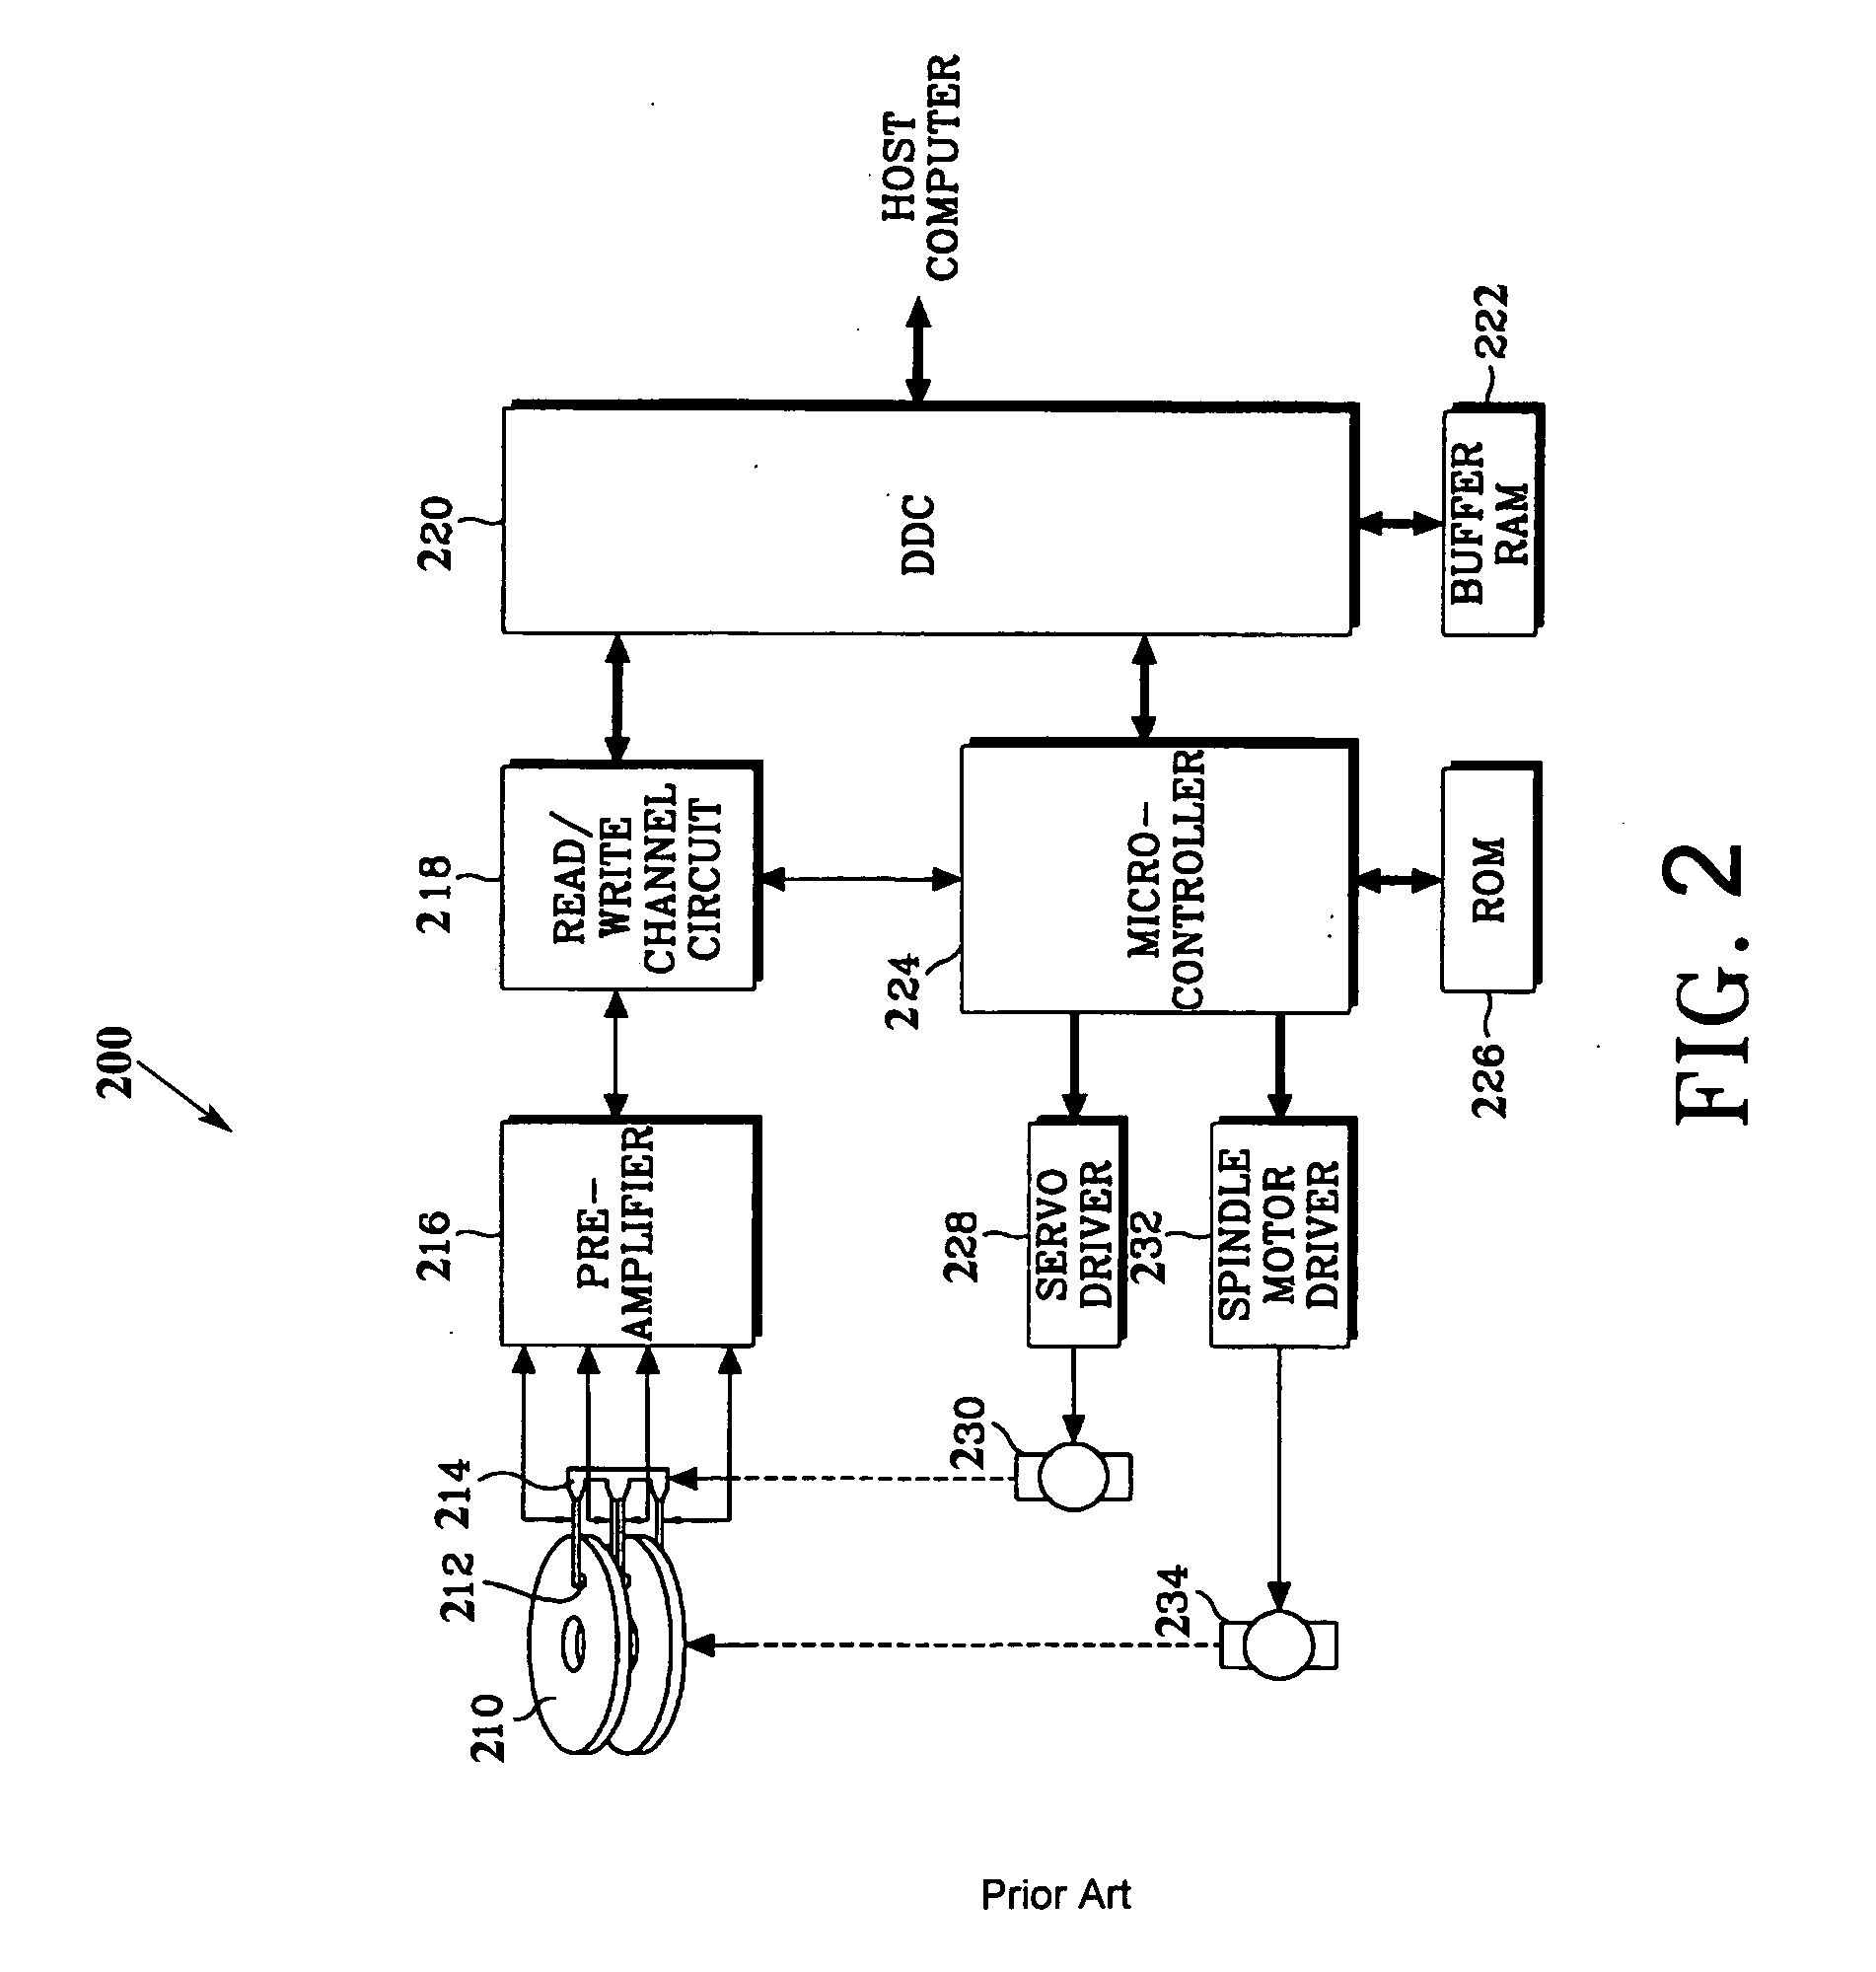 Method and apparatus for data coding for high density recording channels exhibiting low frequency contents